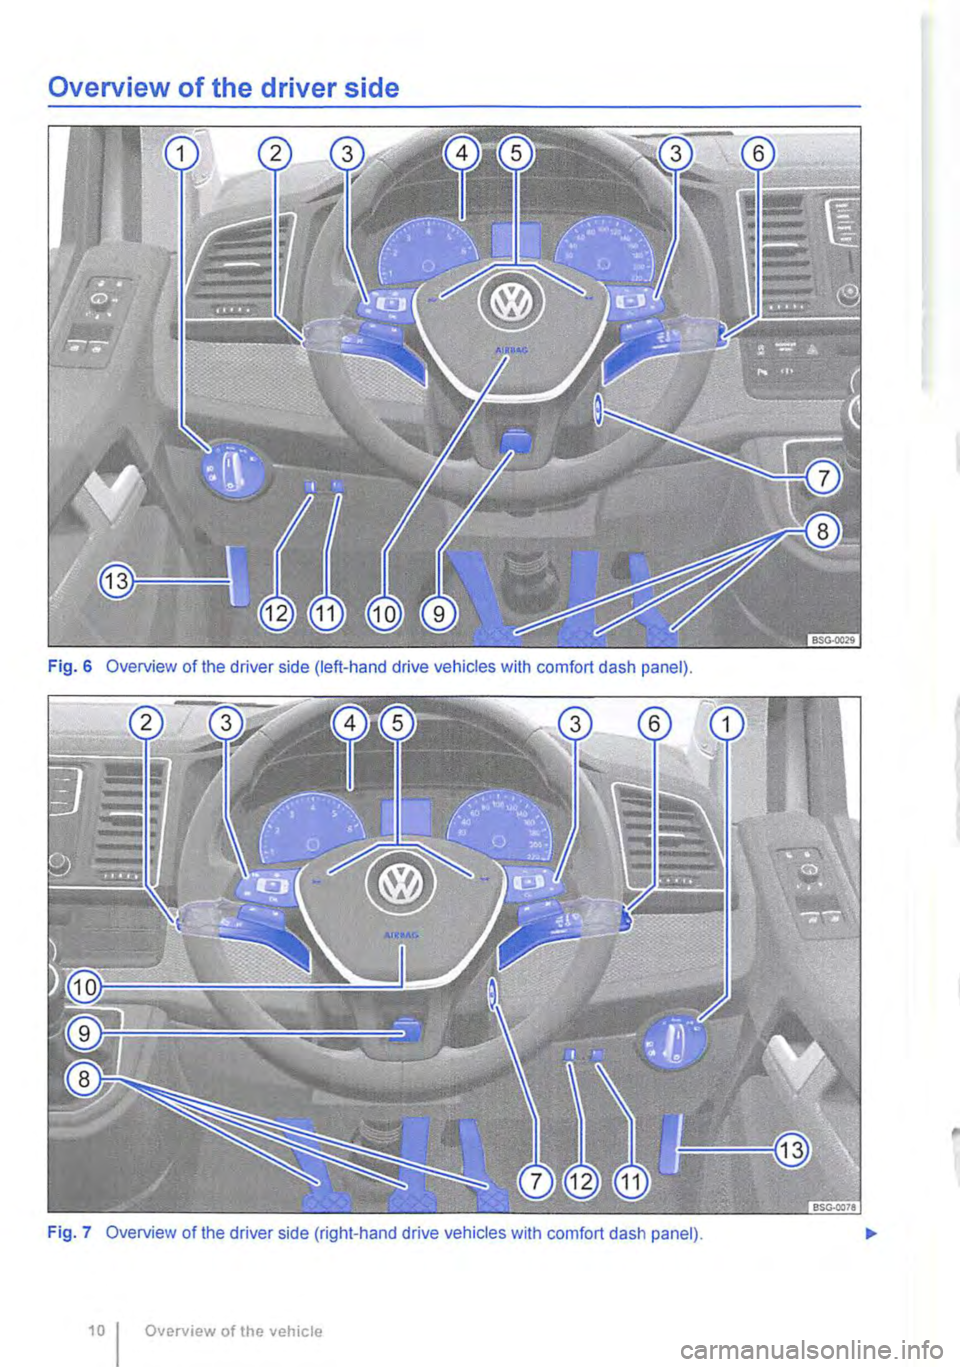 VOLKSWAGEN TRANSPORTER 2011  Owners Manual Overview of the driver side 
Fig. 6 Overview of the driver side (left-hand drive vehicles with comfort dash panel). 
Fig. 7 Overview of the driver side (right-hand drive vehicles with comfort dash pan